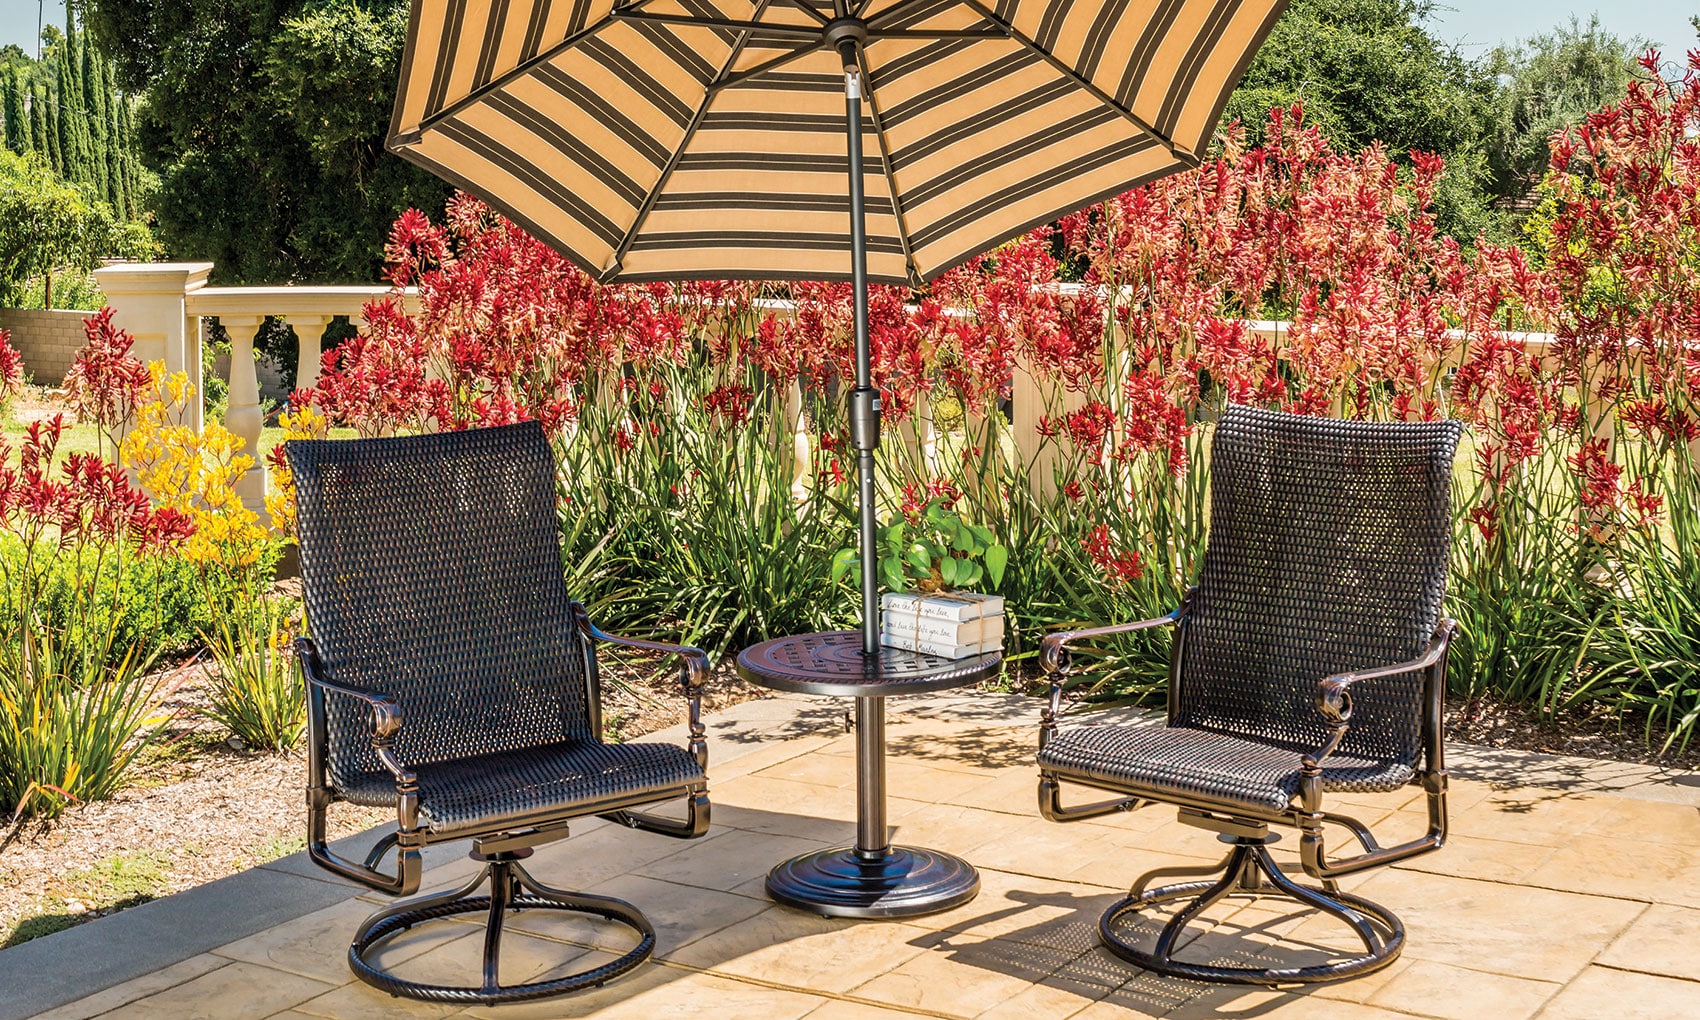 Grand Terrace chairs and umbrella